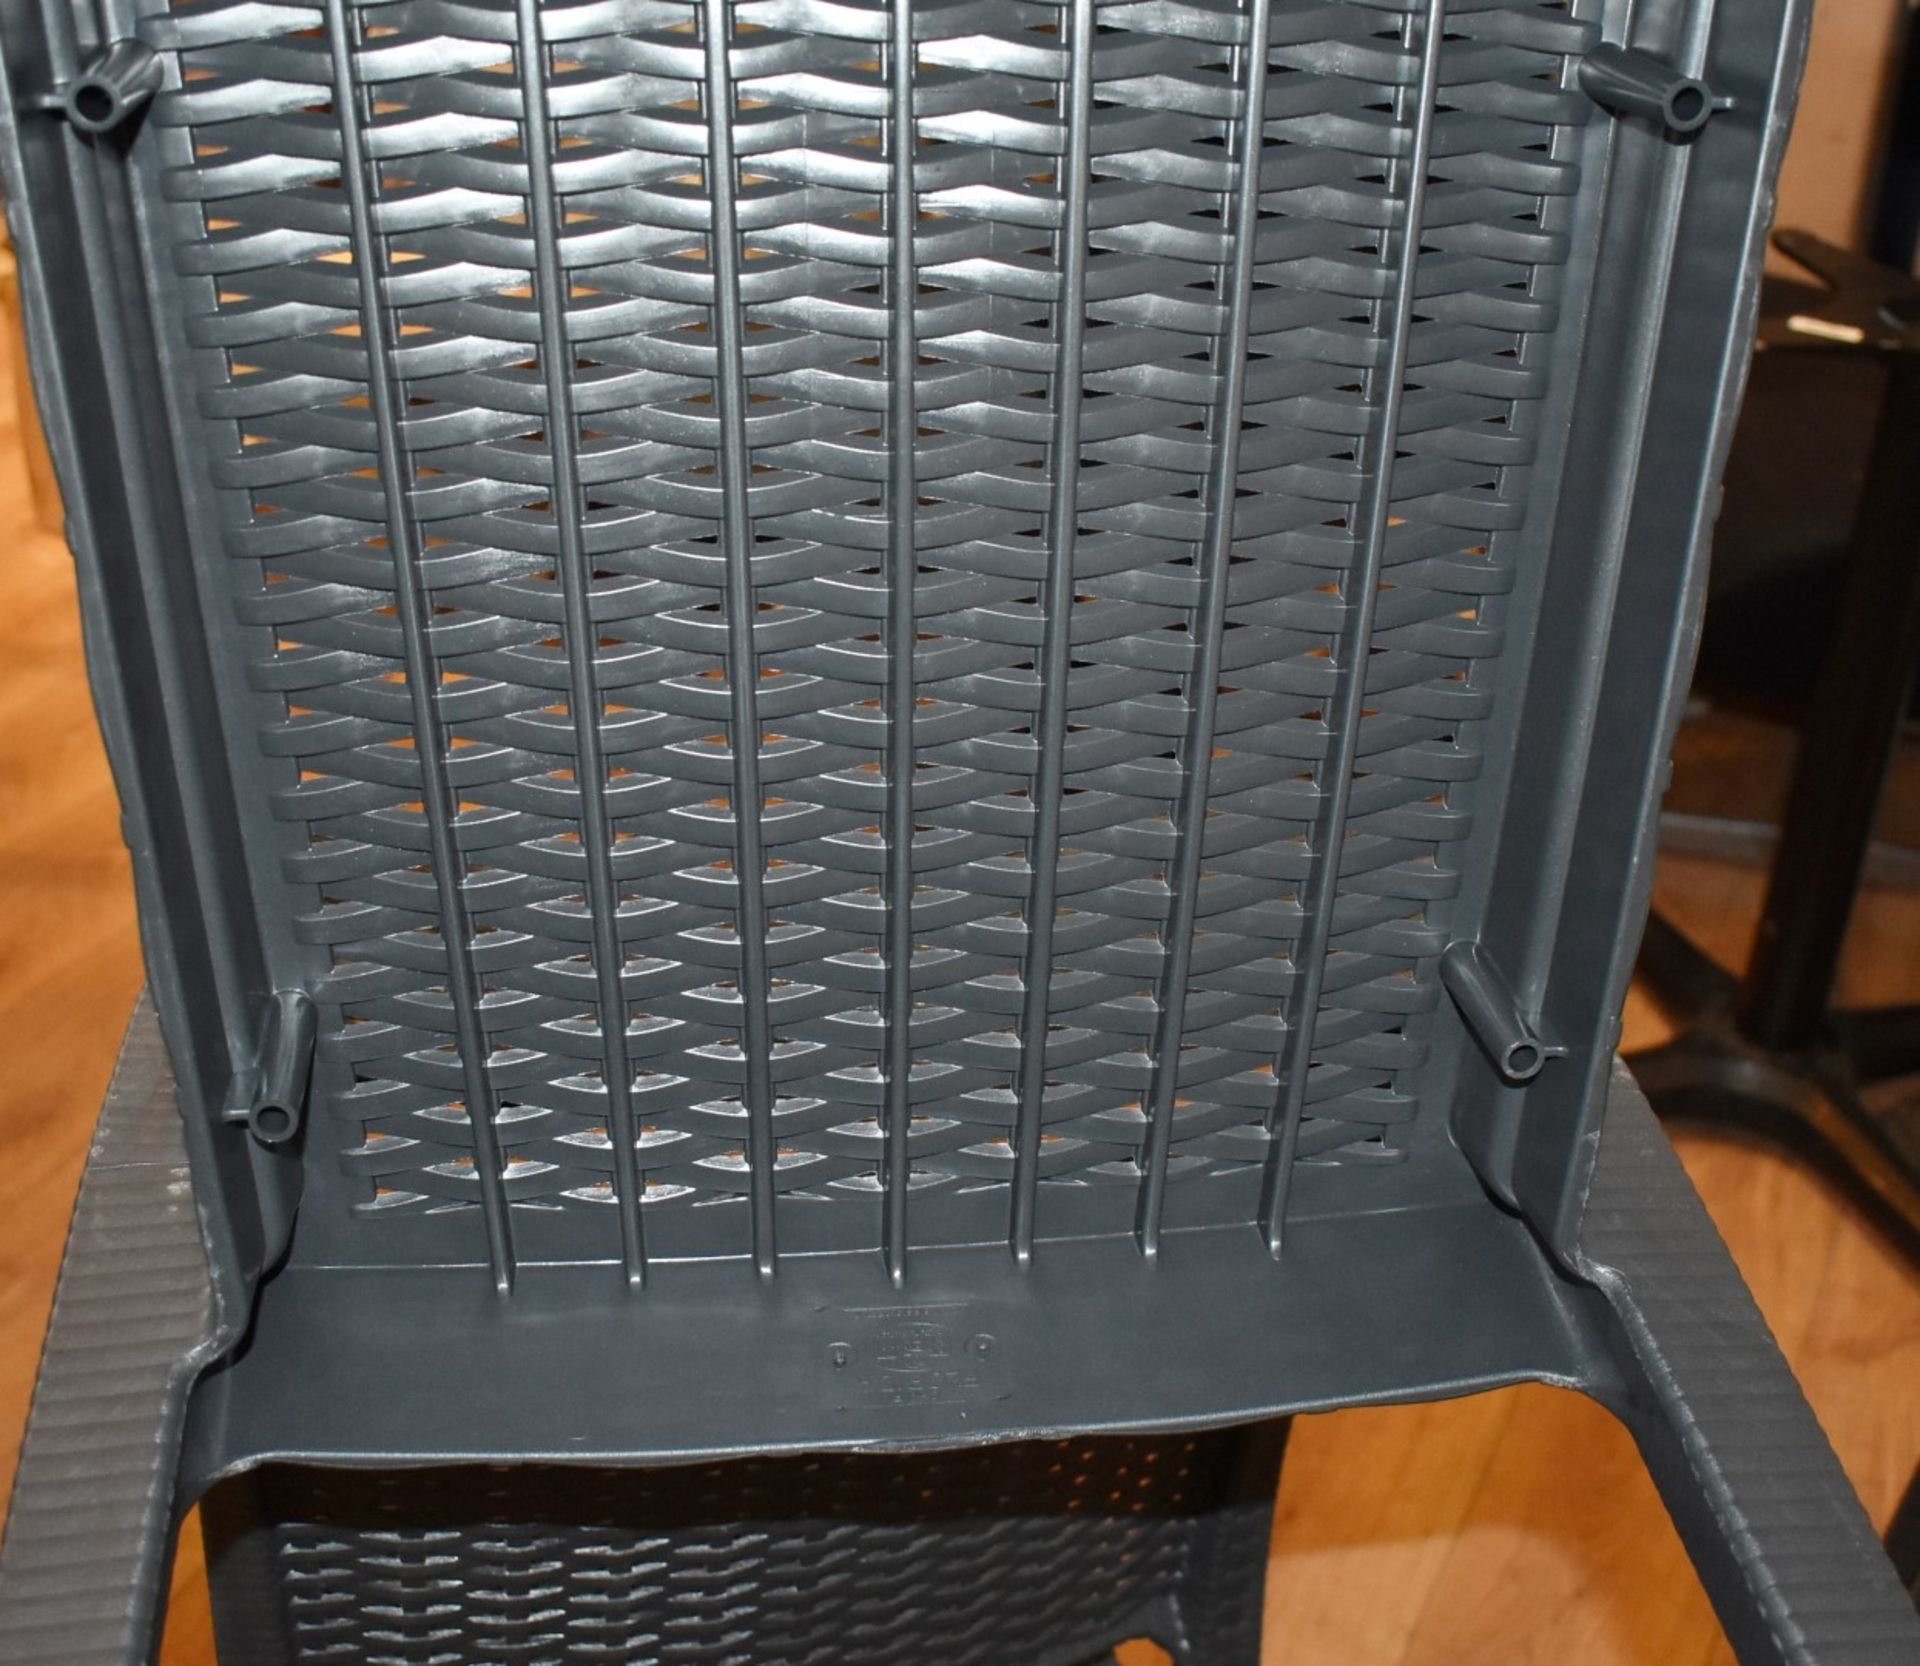 4 x Siesta 'Florida' Rattan Style Garden Chairs In Dark Grey - Suitable For Commercial or Home Use - - Image 10 of 21